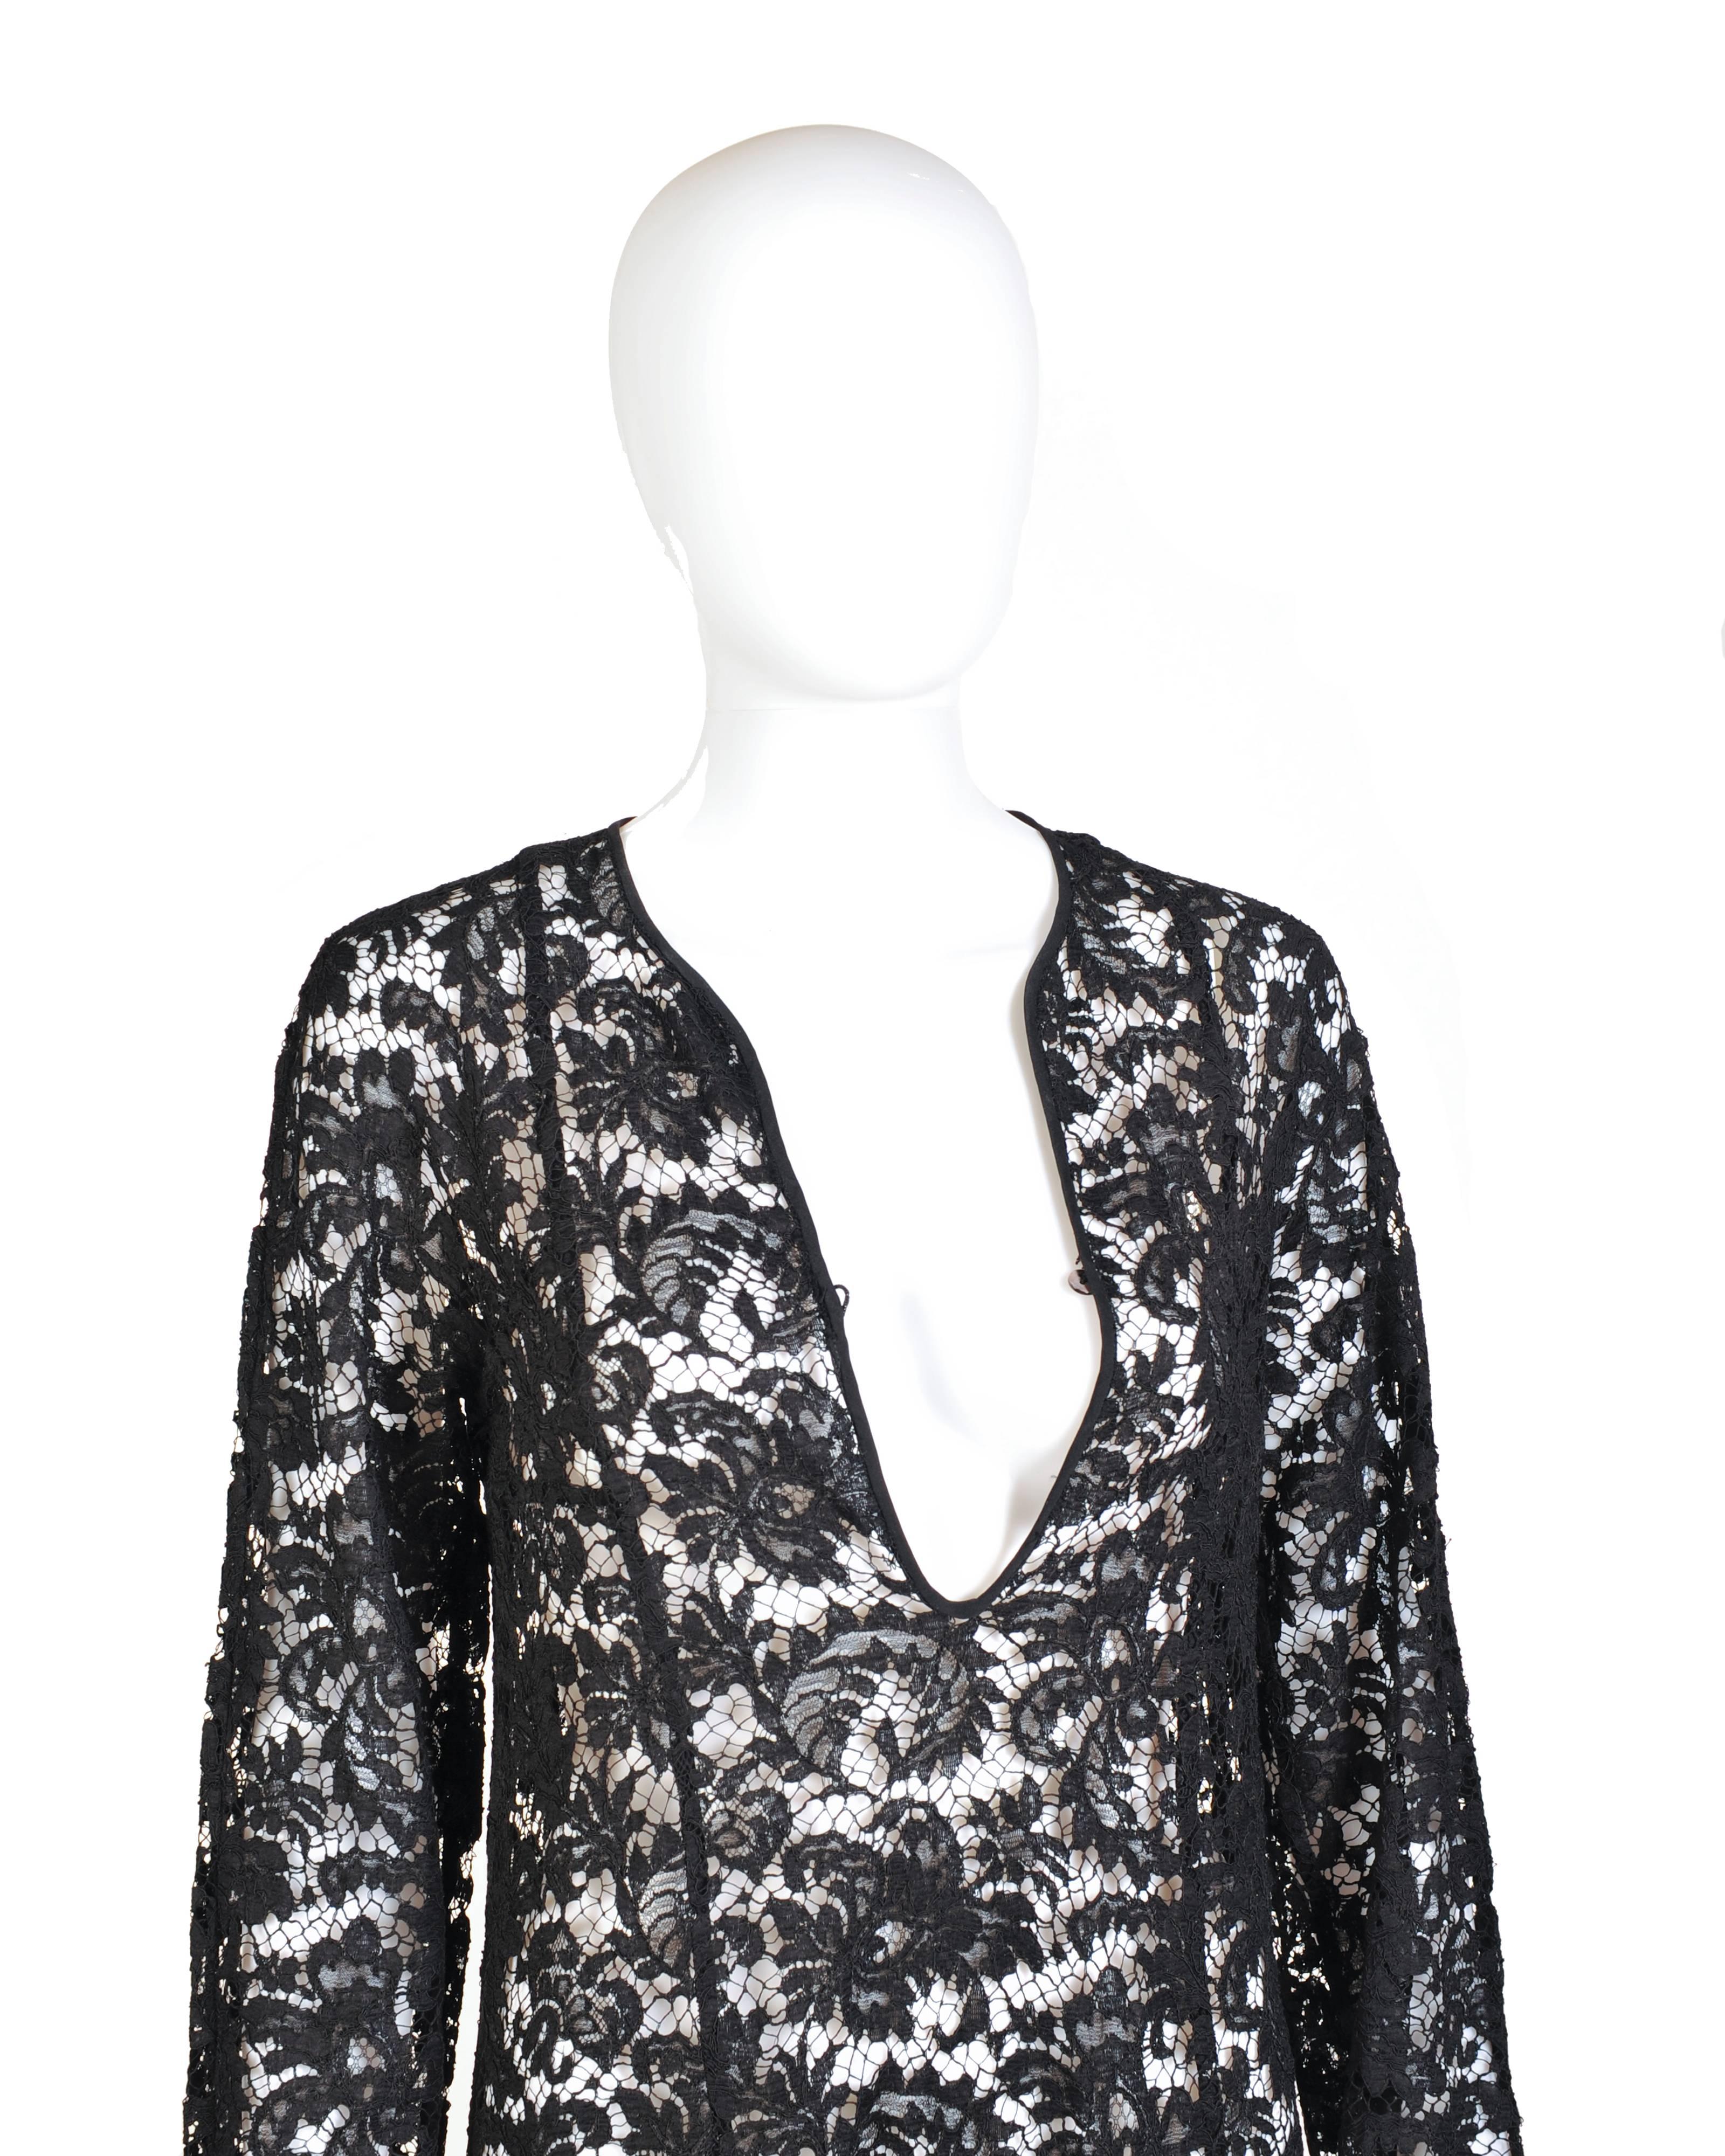 Women's 1995 Vintage Iconic Tom Ford for Gucci Black Lace Dress